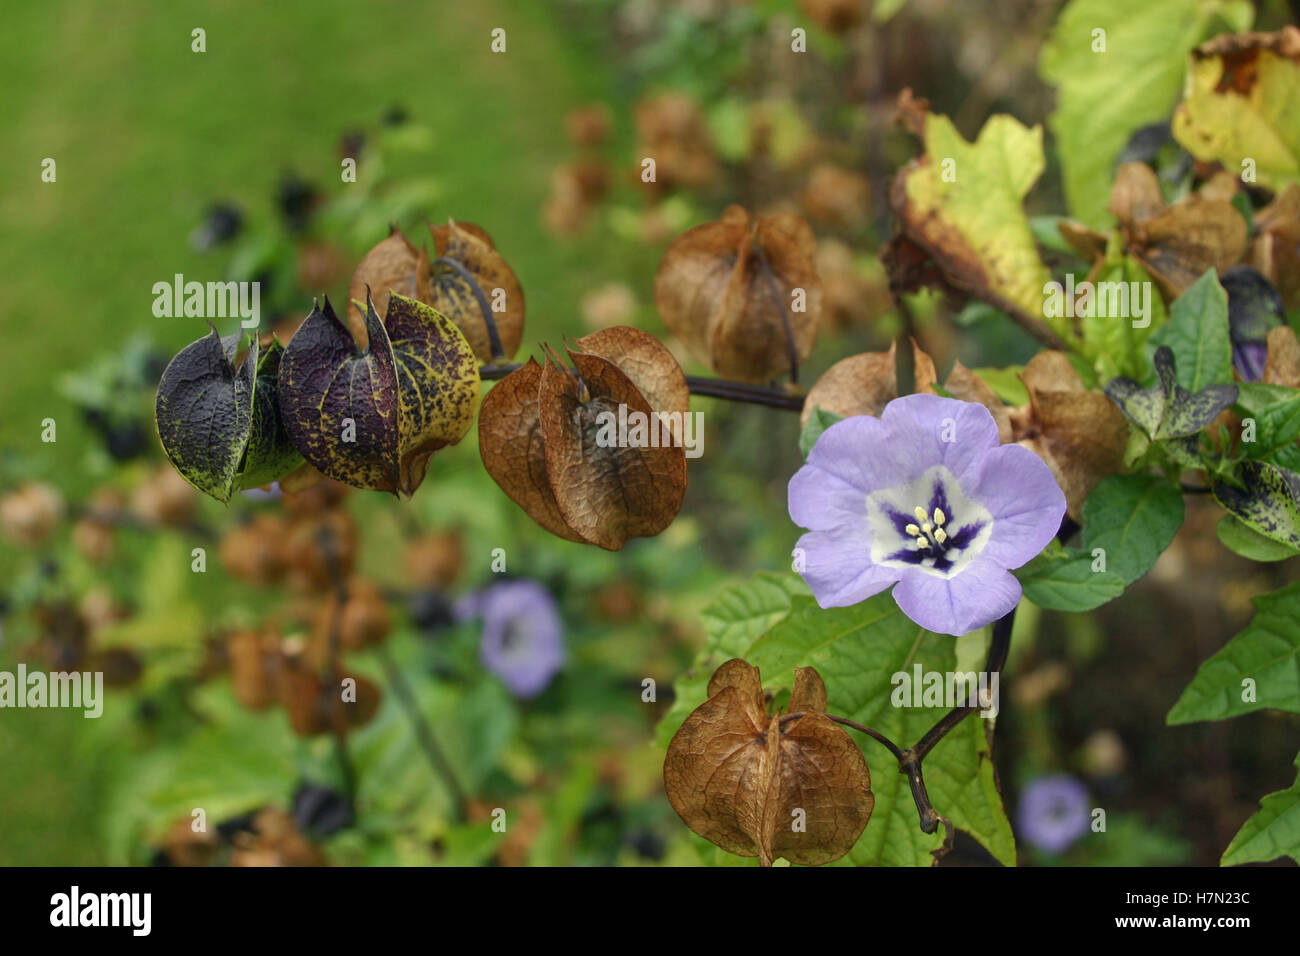 Shoofly plant, Nicandra physalodes, flowers with older flowers forming Chinese style lanterns with a background of leaves. Stock Photo